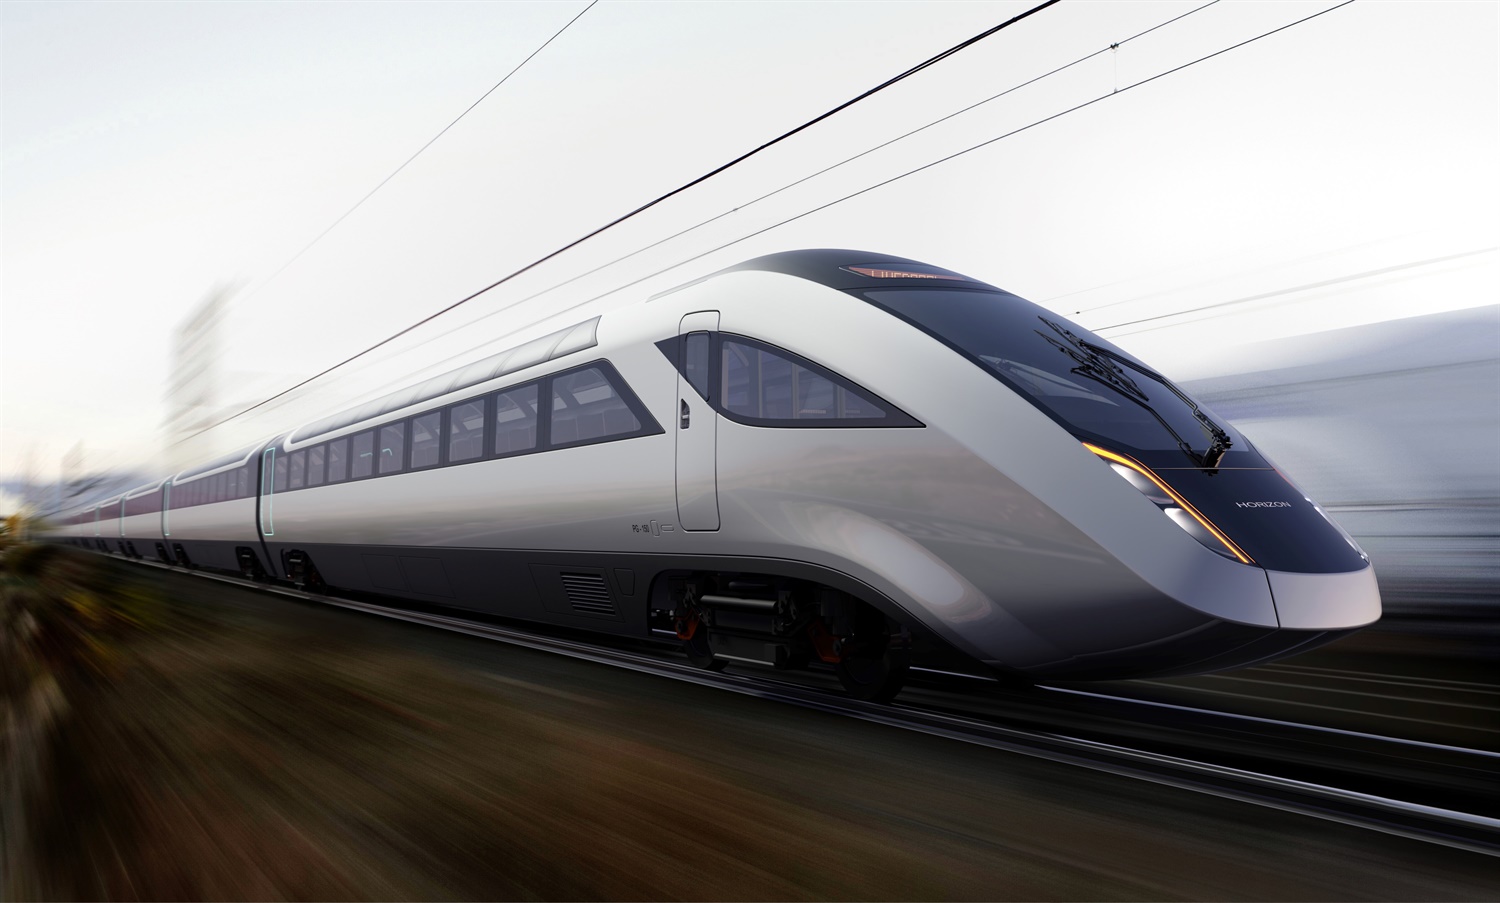 Finalists selected in Tomorrow’s Train Design competition